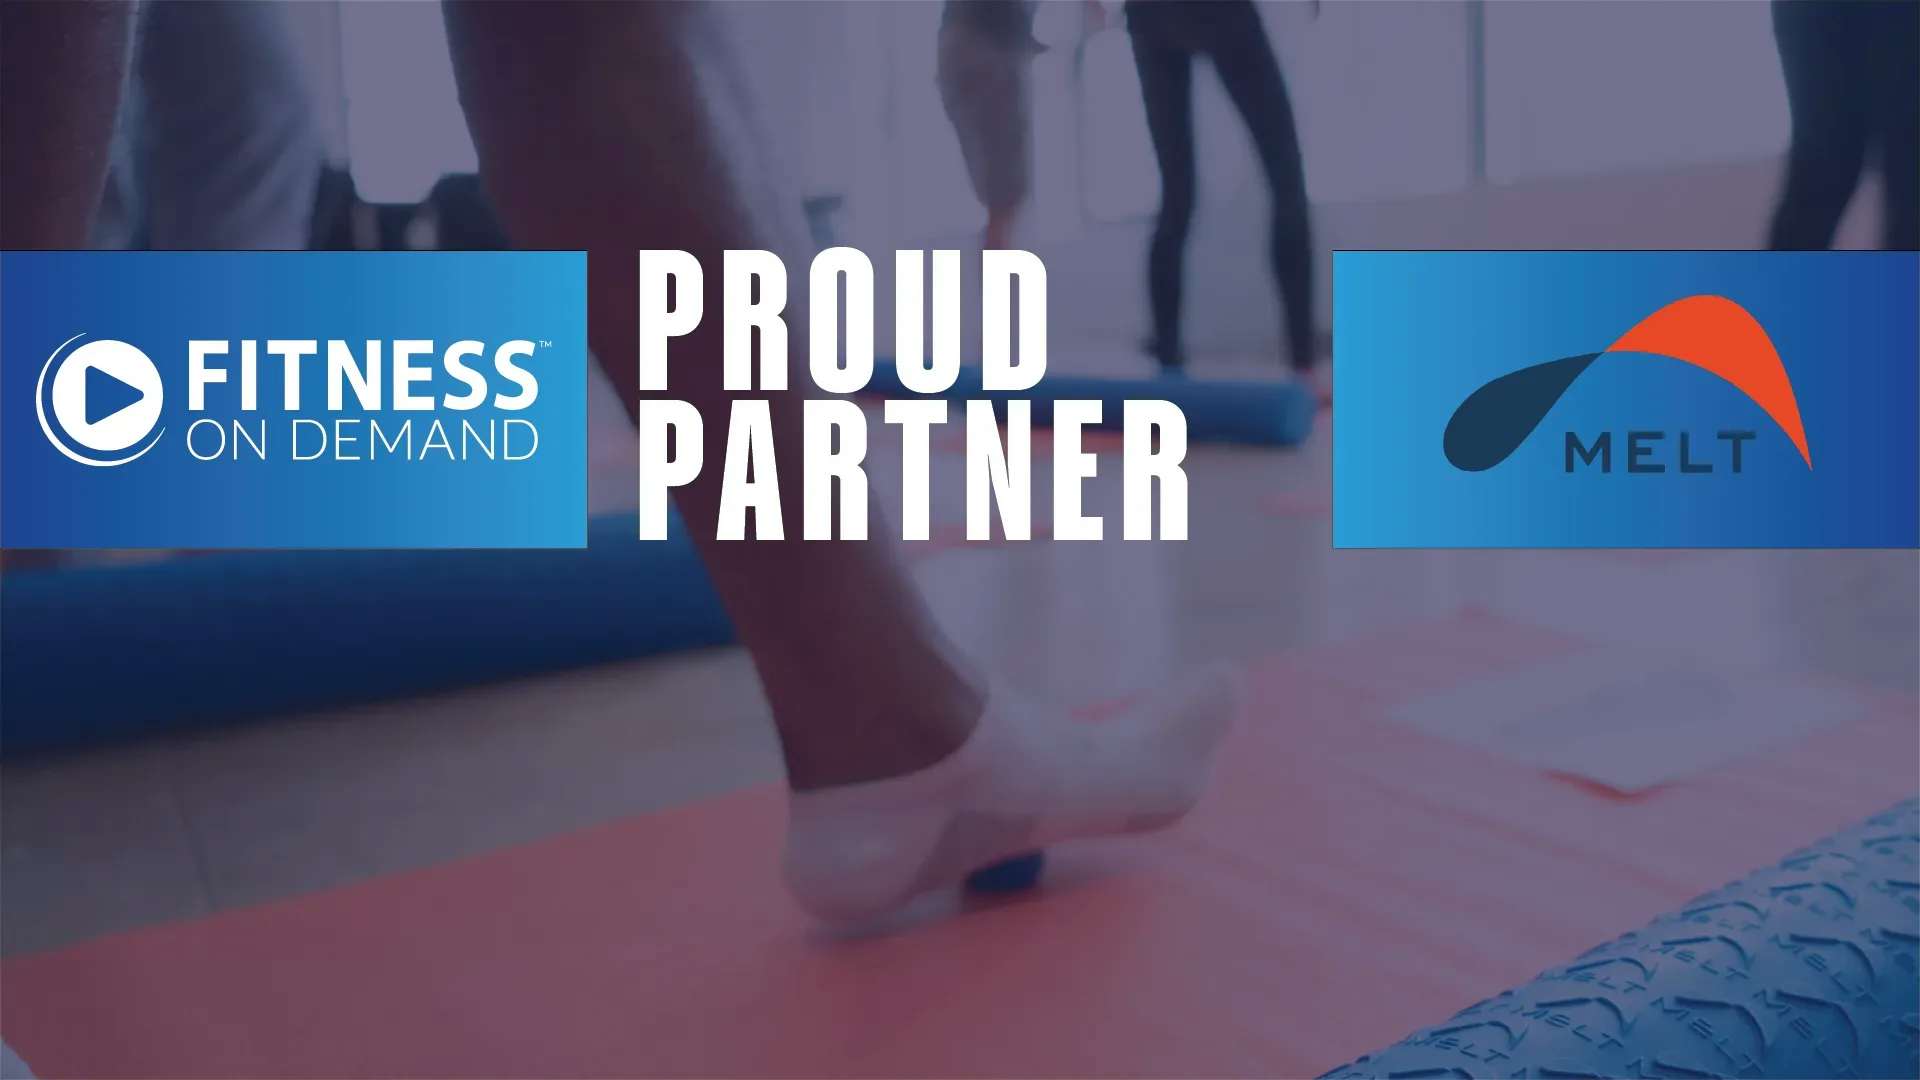 Exciting news – MELT Method joins Fitness On Demand as part of new category: Joint, Stress & Pain Relief